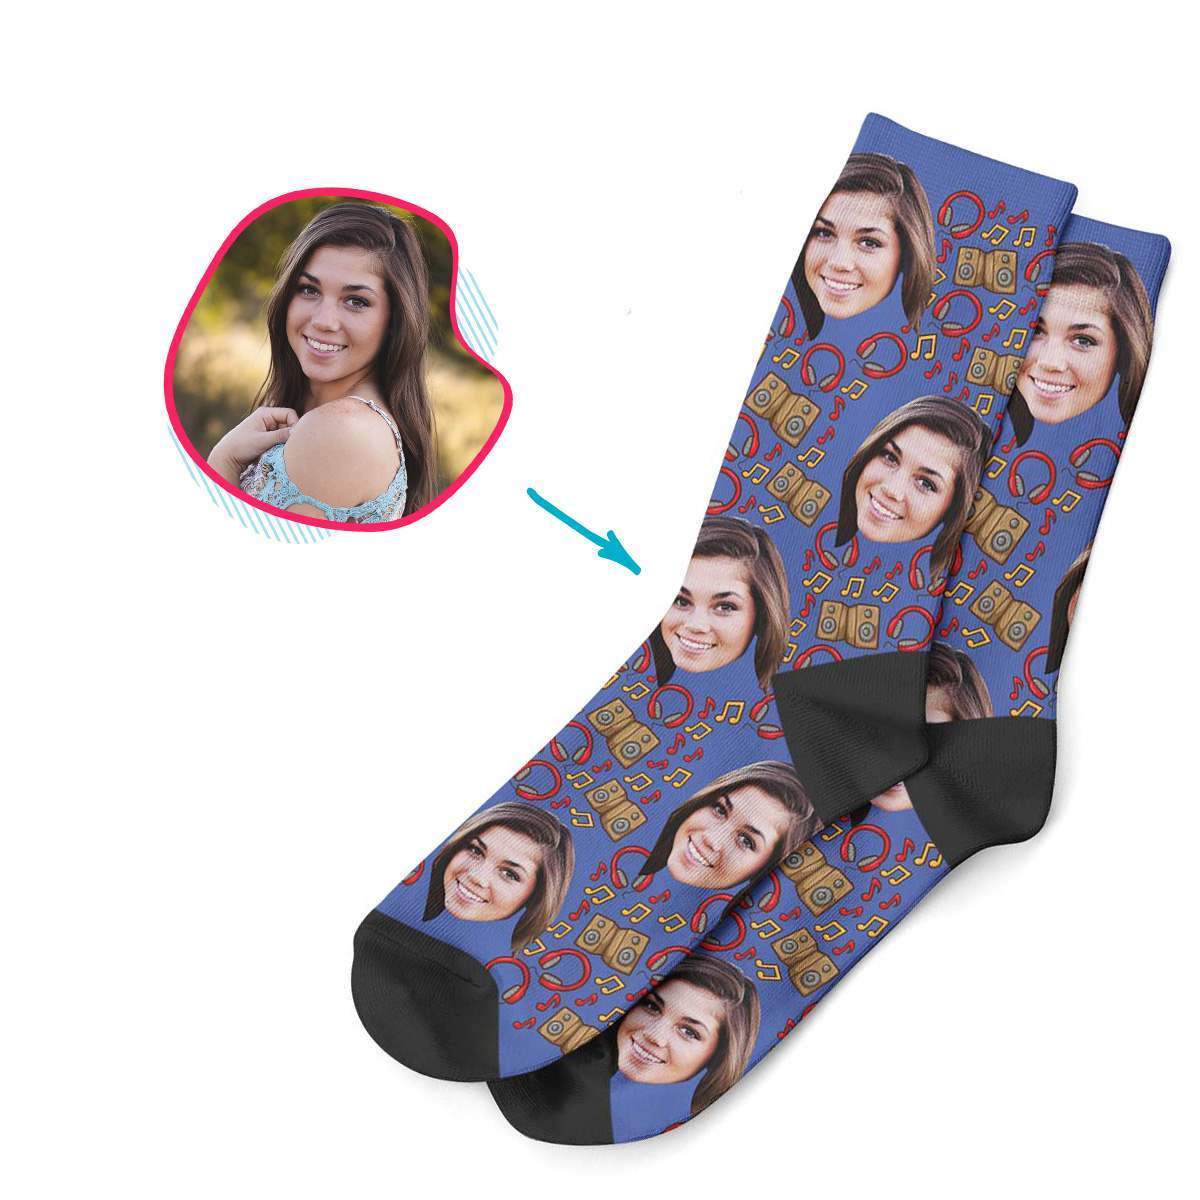 darkblue Music socks personalized with photo of face printed on them